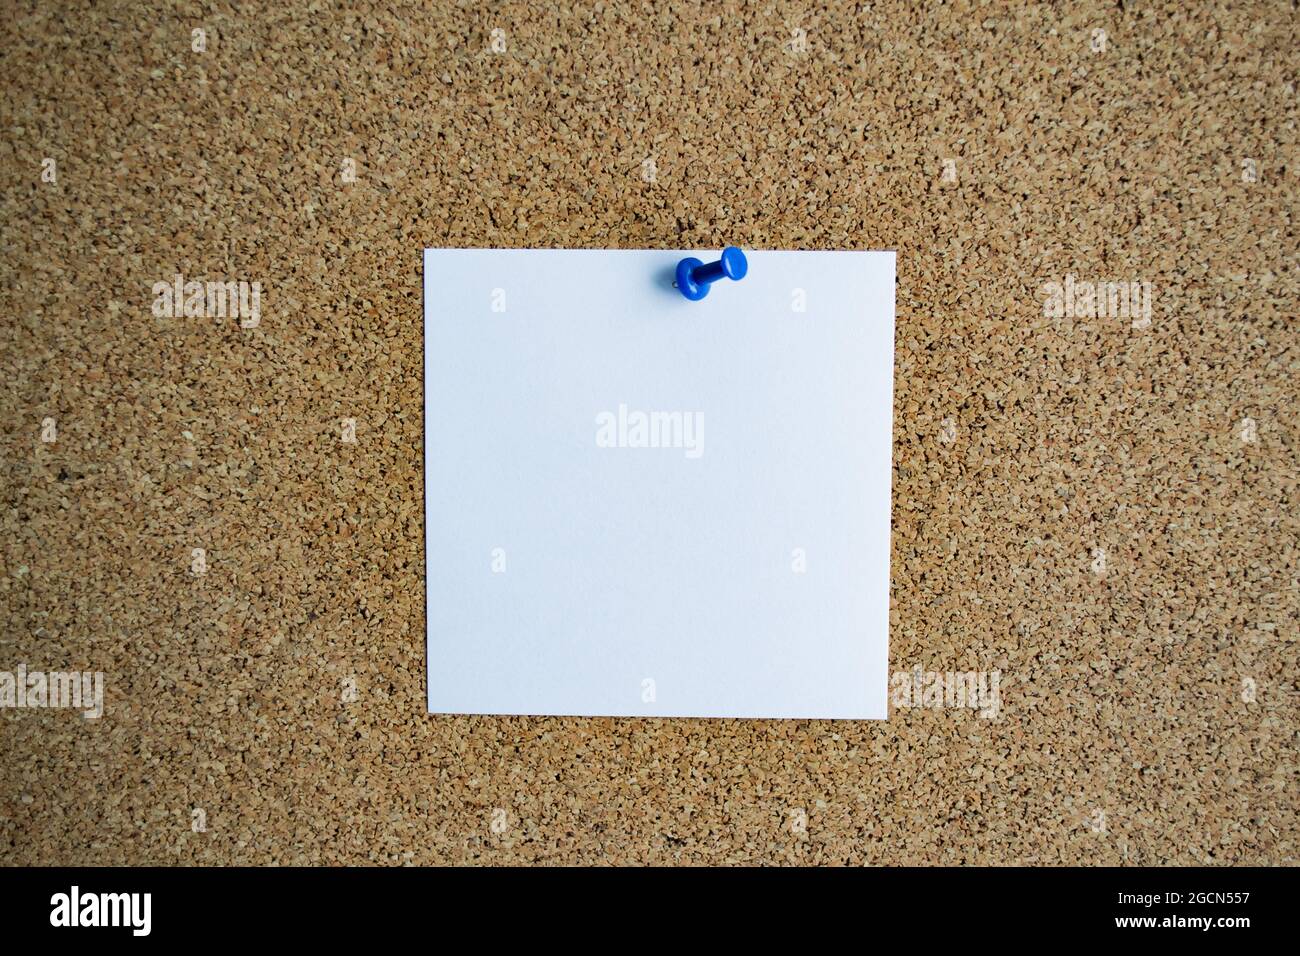 A white paper note on a cork board, attached with a blue pushpin. Copy space. Stock Photo